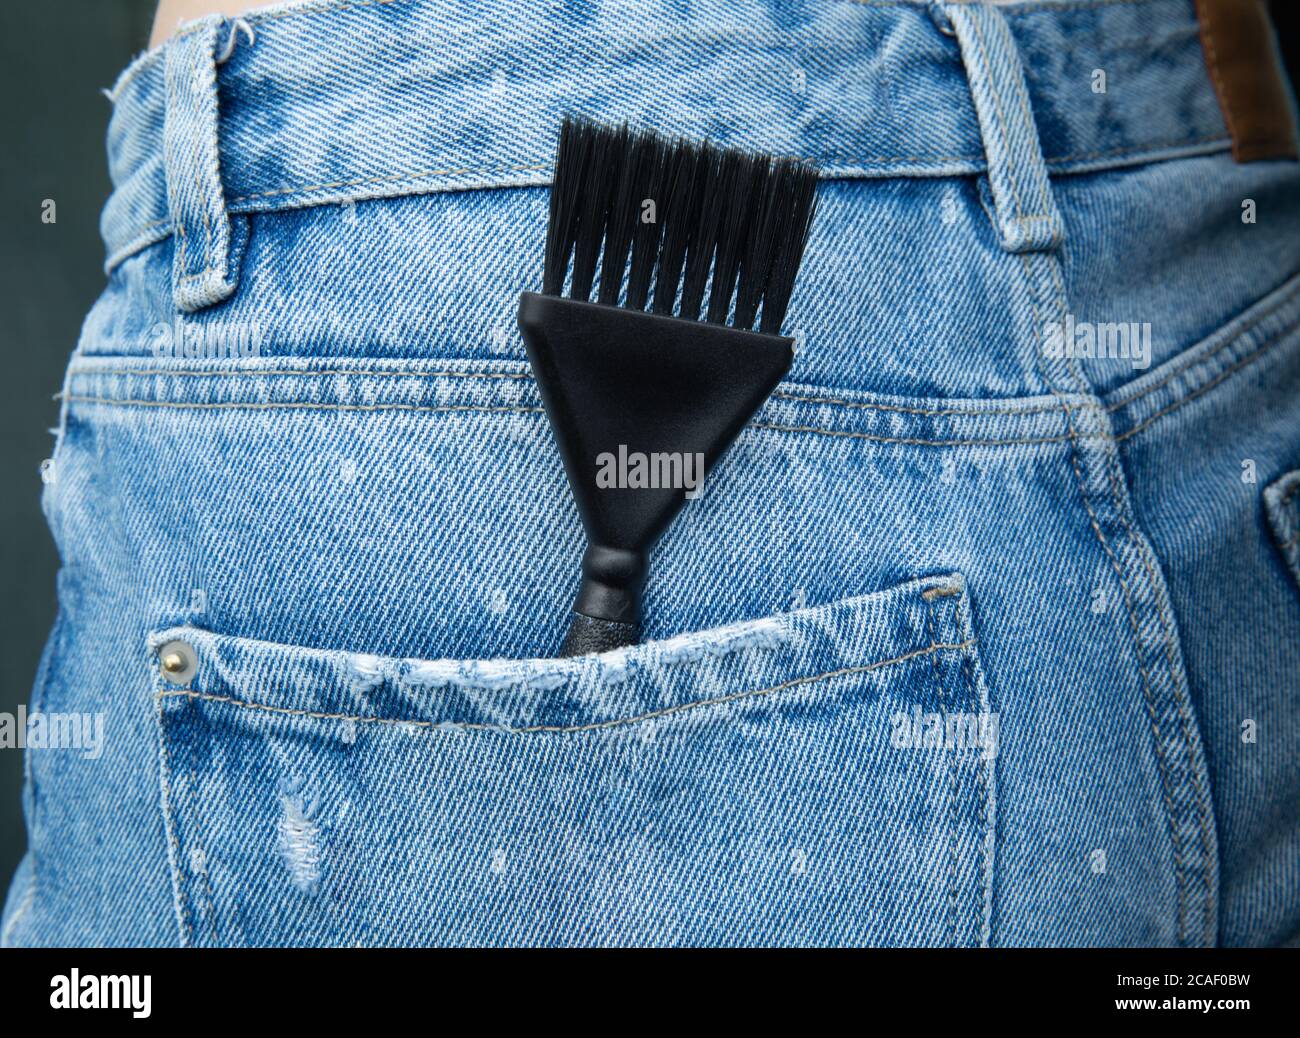 the hair dye brush is in the jeans pocket Stock Photo - Alamy